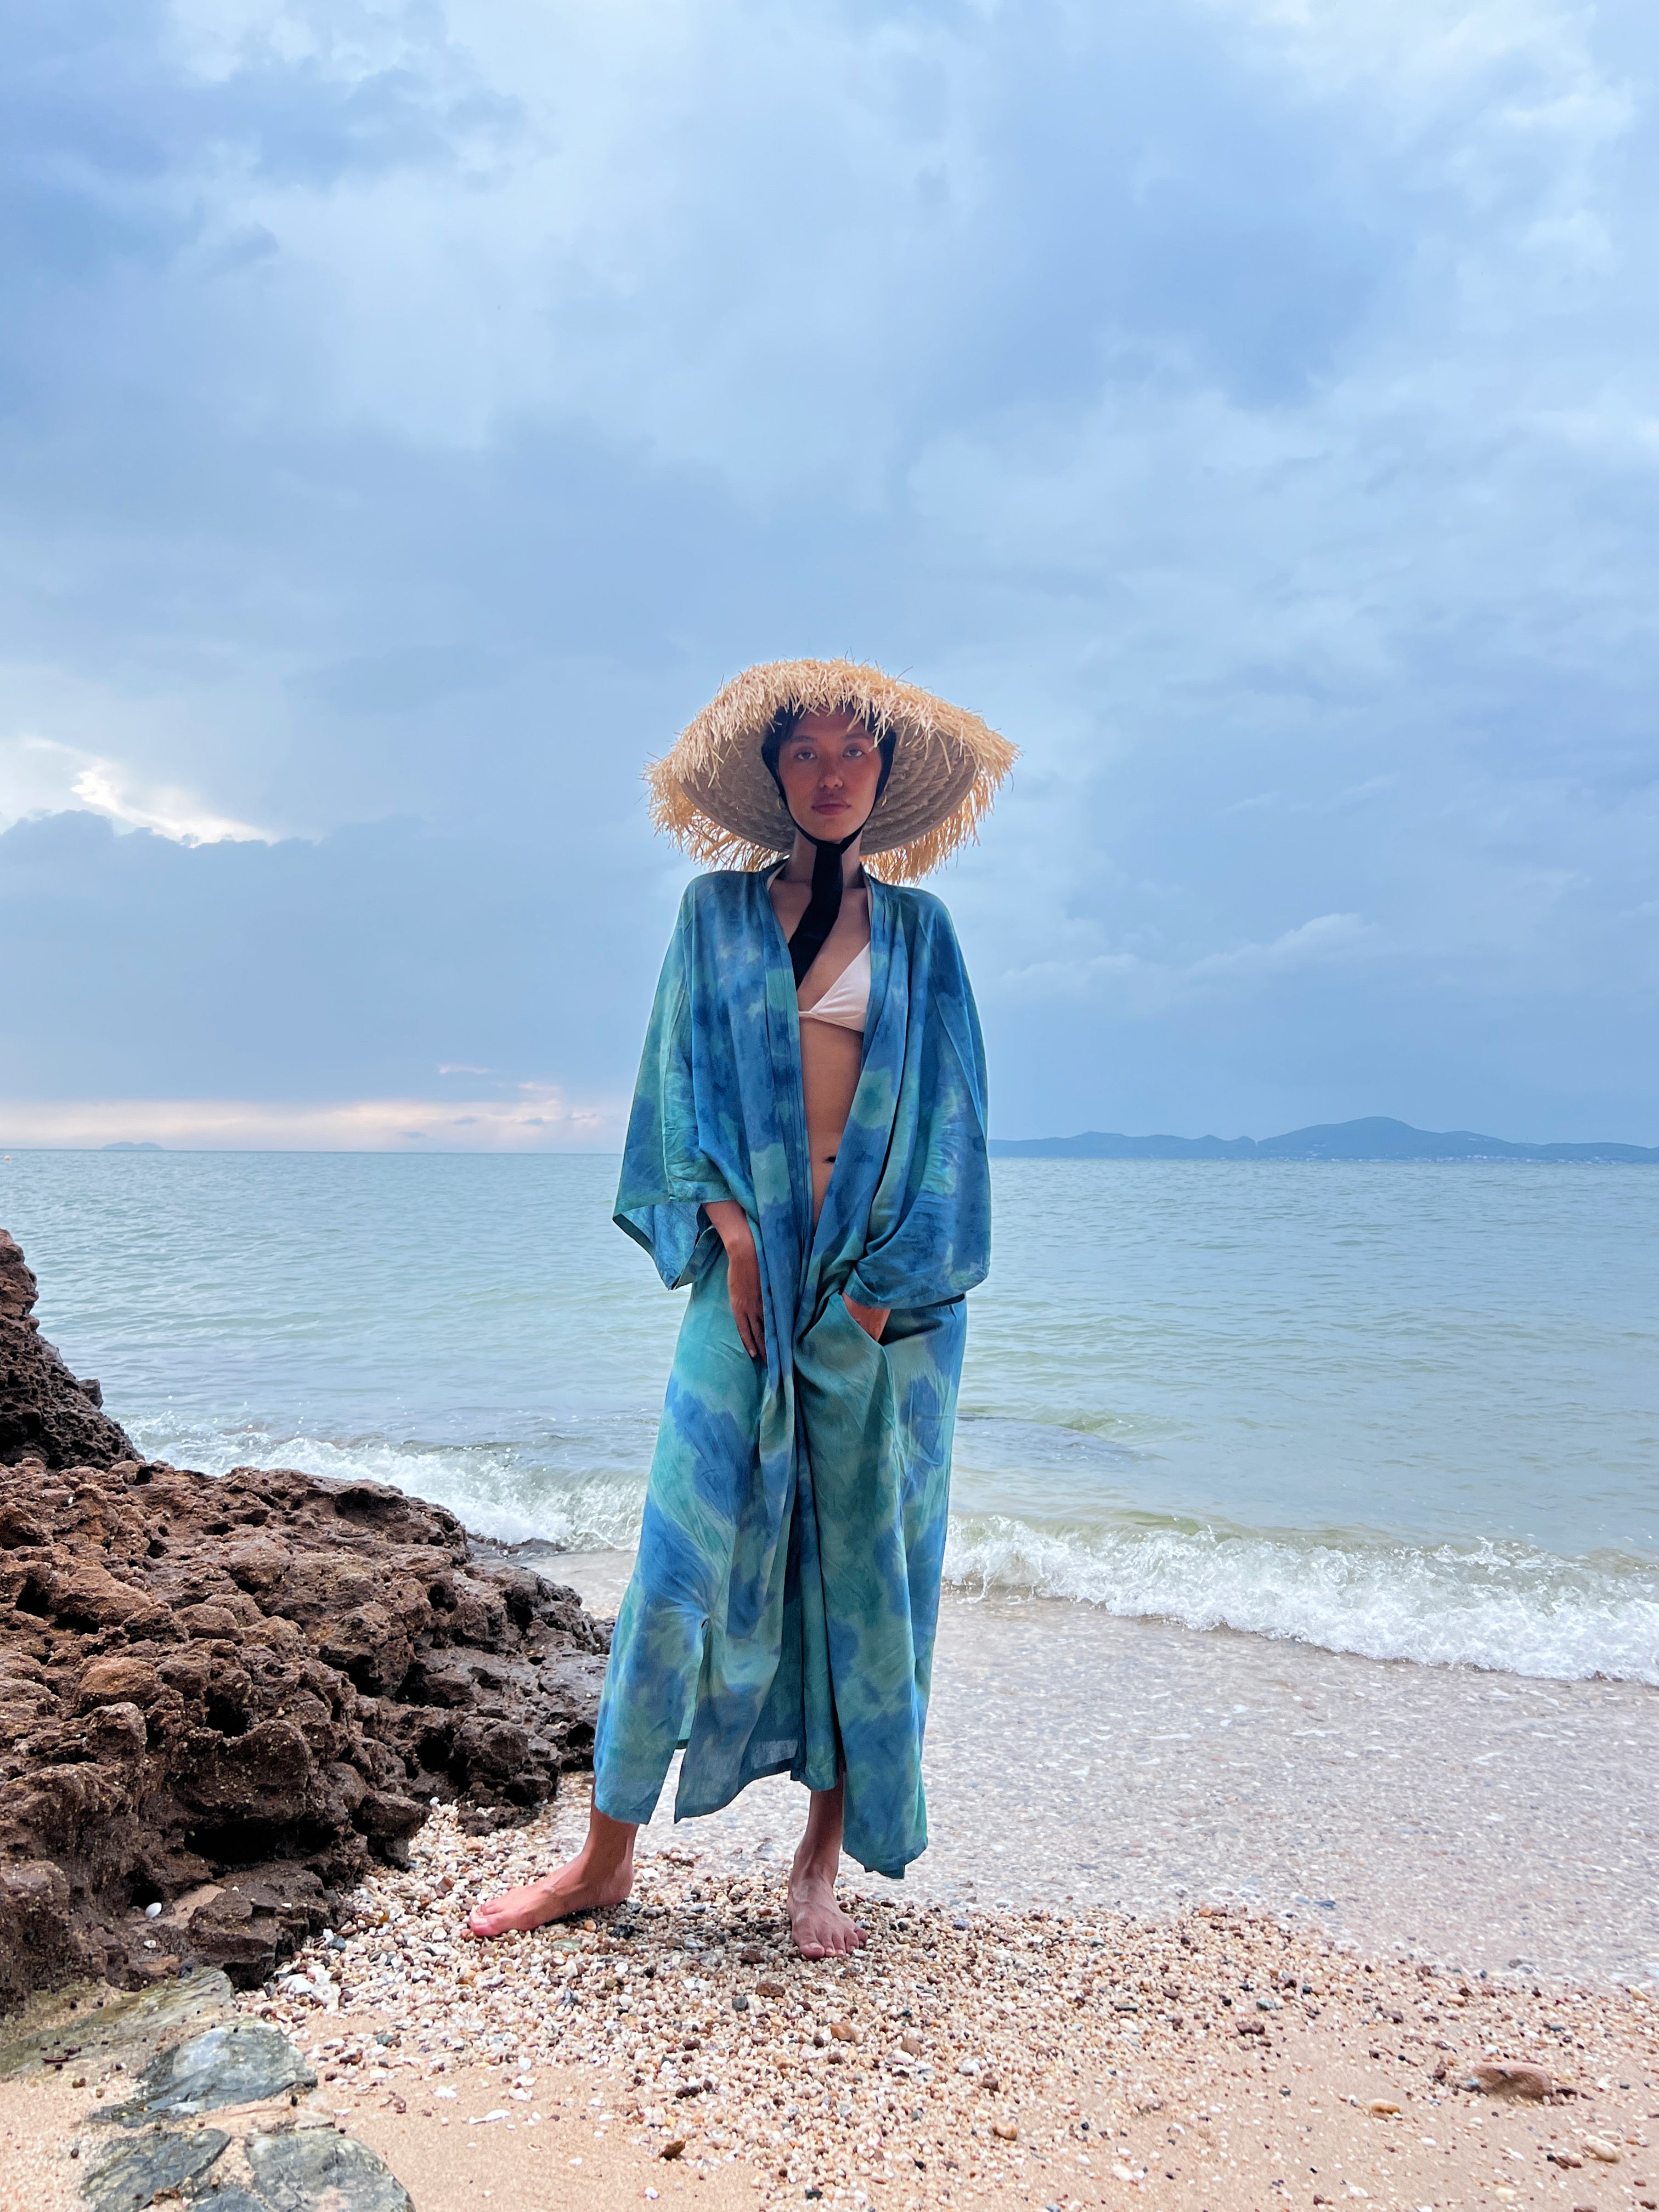 Shop Oversized Unisex Tie dye kimono robe in blue, boho beach coverup, perfect for vacation or everyday wear, this product is handmade with love by Coco de Chom.